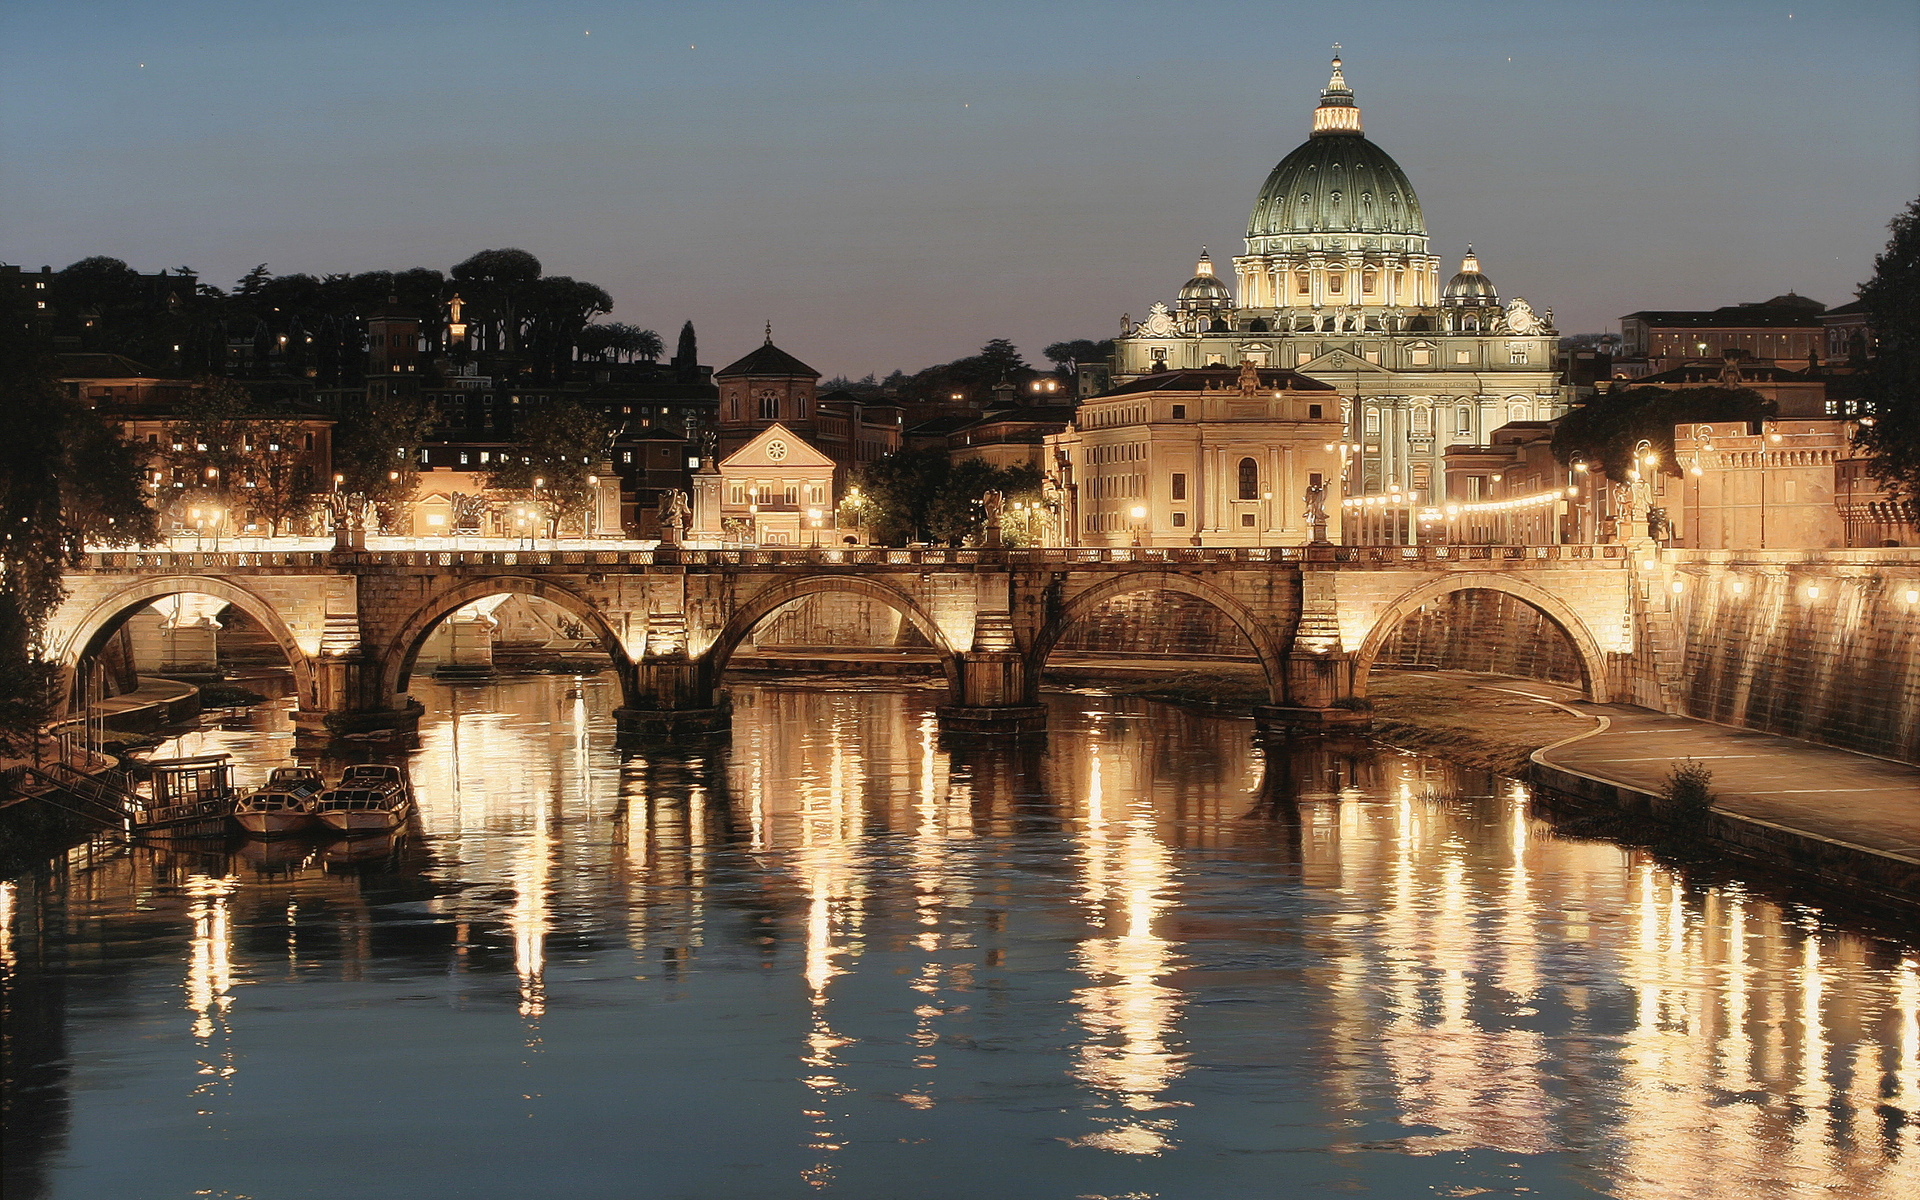 san, Pietro, Tiber, St, Peter, Rome, Italy, World, Cities, Architecture, Building, Cathedrals, Church, Buildings, Bridges, Rivers, Water, Reflection, Glisten, Shine, Night, Lights, Sky, Scenic, Bright Wallpaper